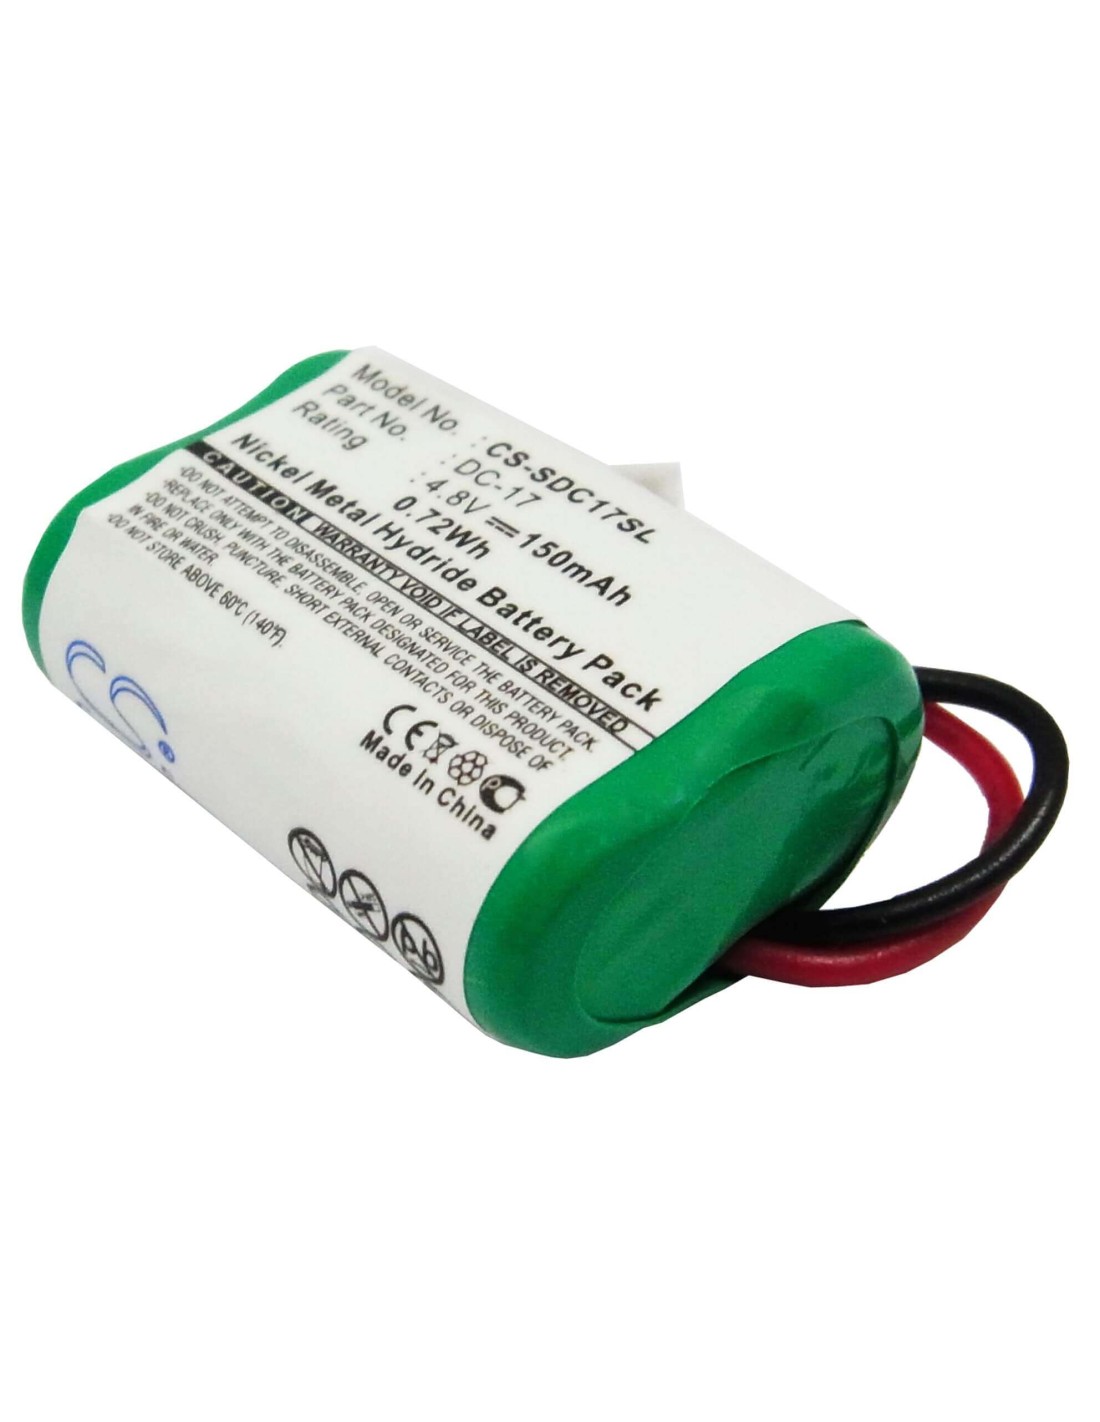 Battery for Sportdog Field Trainer Sd-400, Field Trainer Sd-400s 4.8V, 150mAh - 0.72Wh